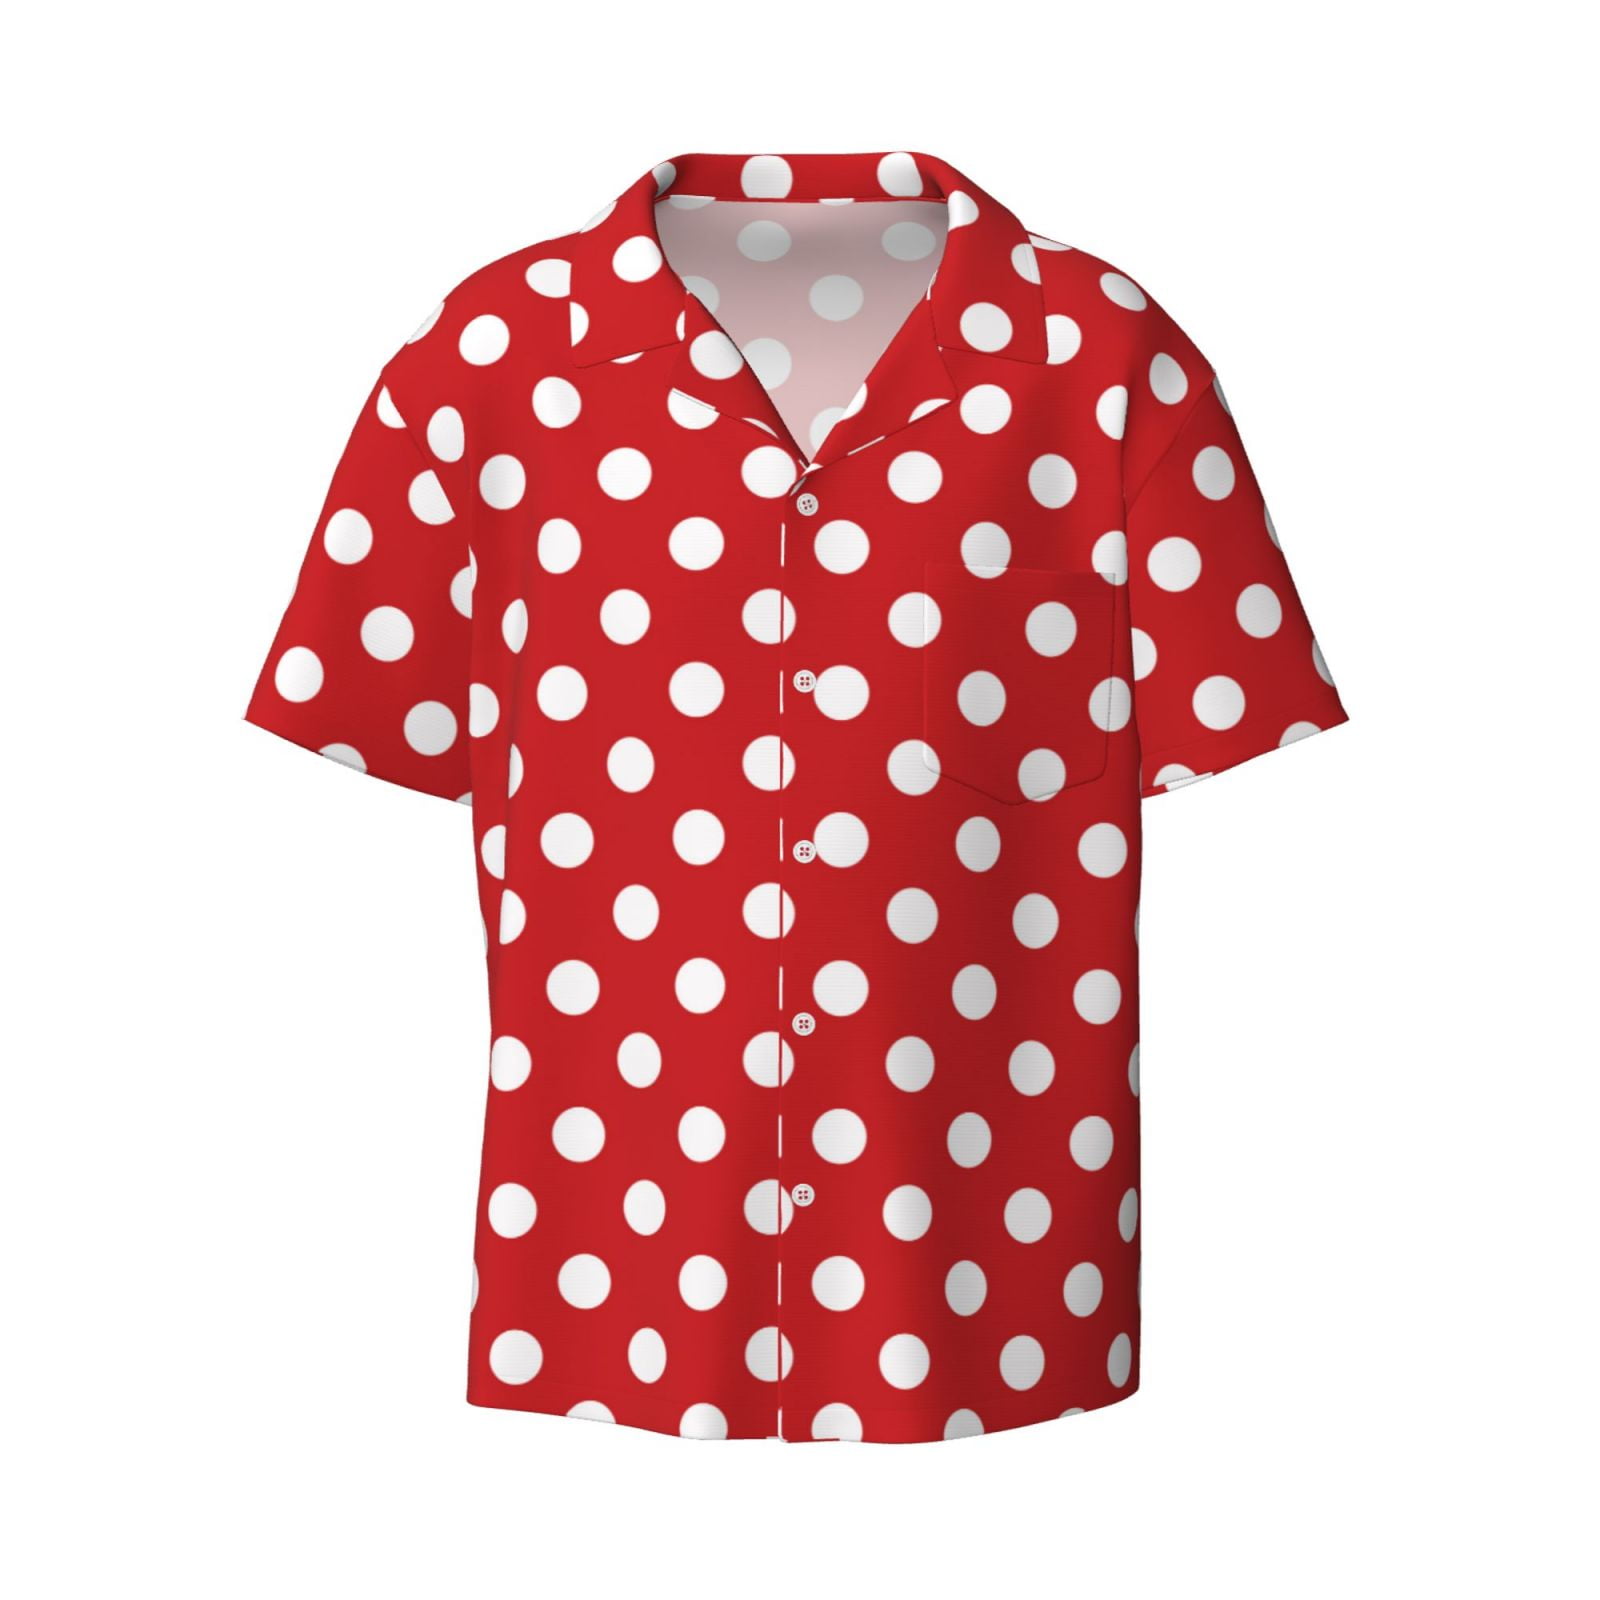 Easygdp Red Polka Dot Men's Casual Short-sleeved Shirt with Pocket and ...